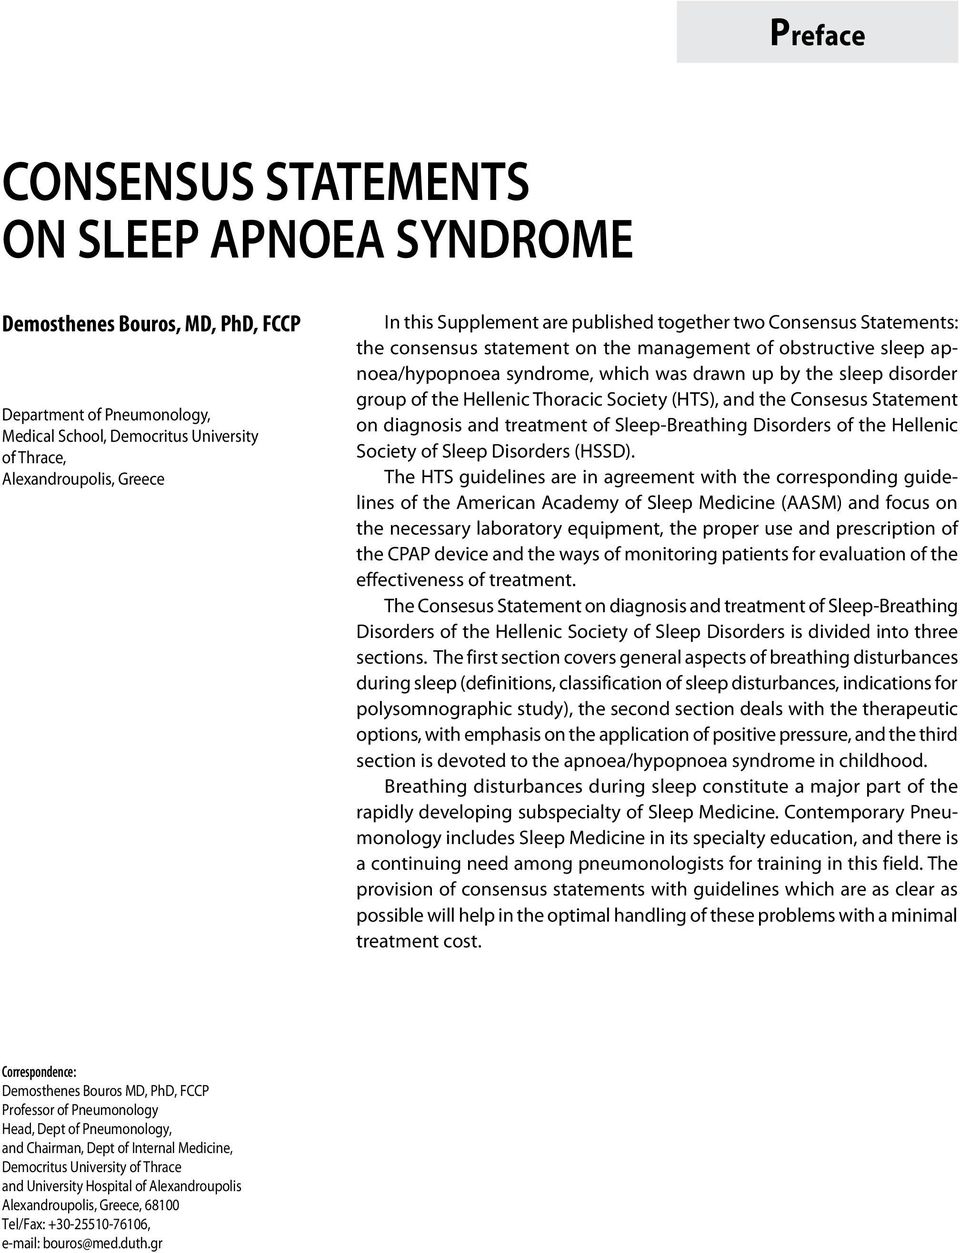 the Hellenic Thoracic Society (HTS), and the Consesus Statement on diagnosis and treatment of Sleep-Breathing Disorders of the Hellenic Society of Sleep Disorders (HSSD).